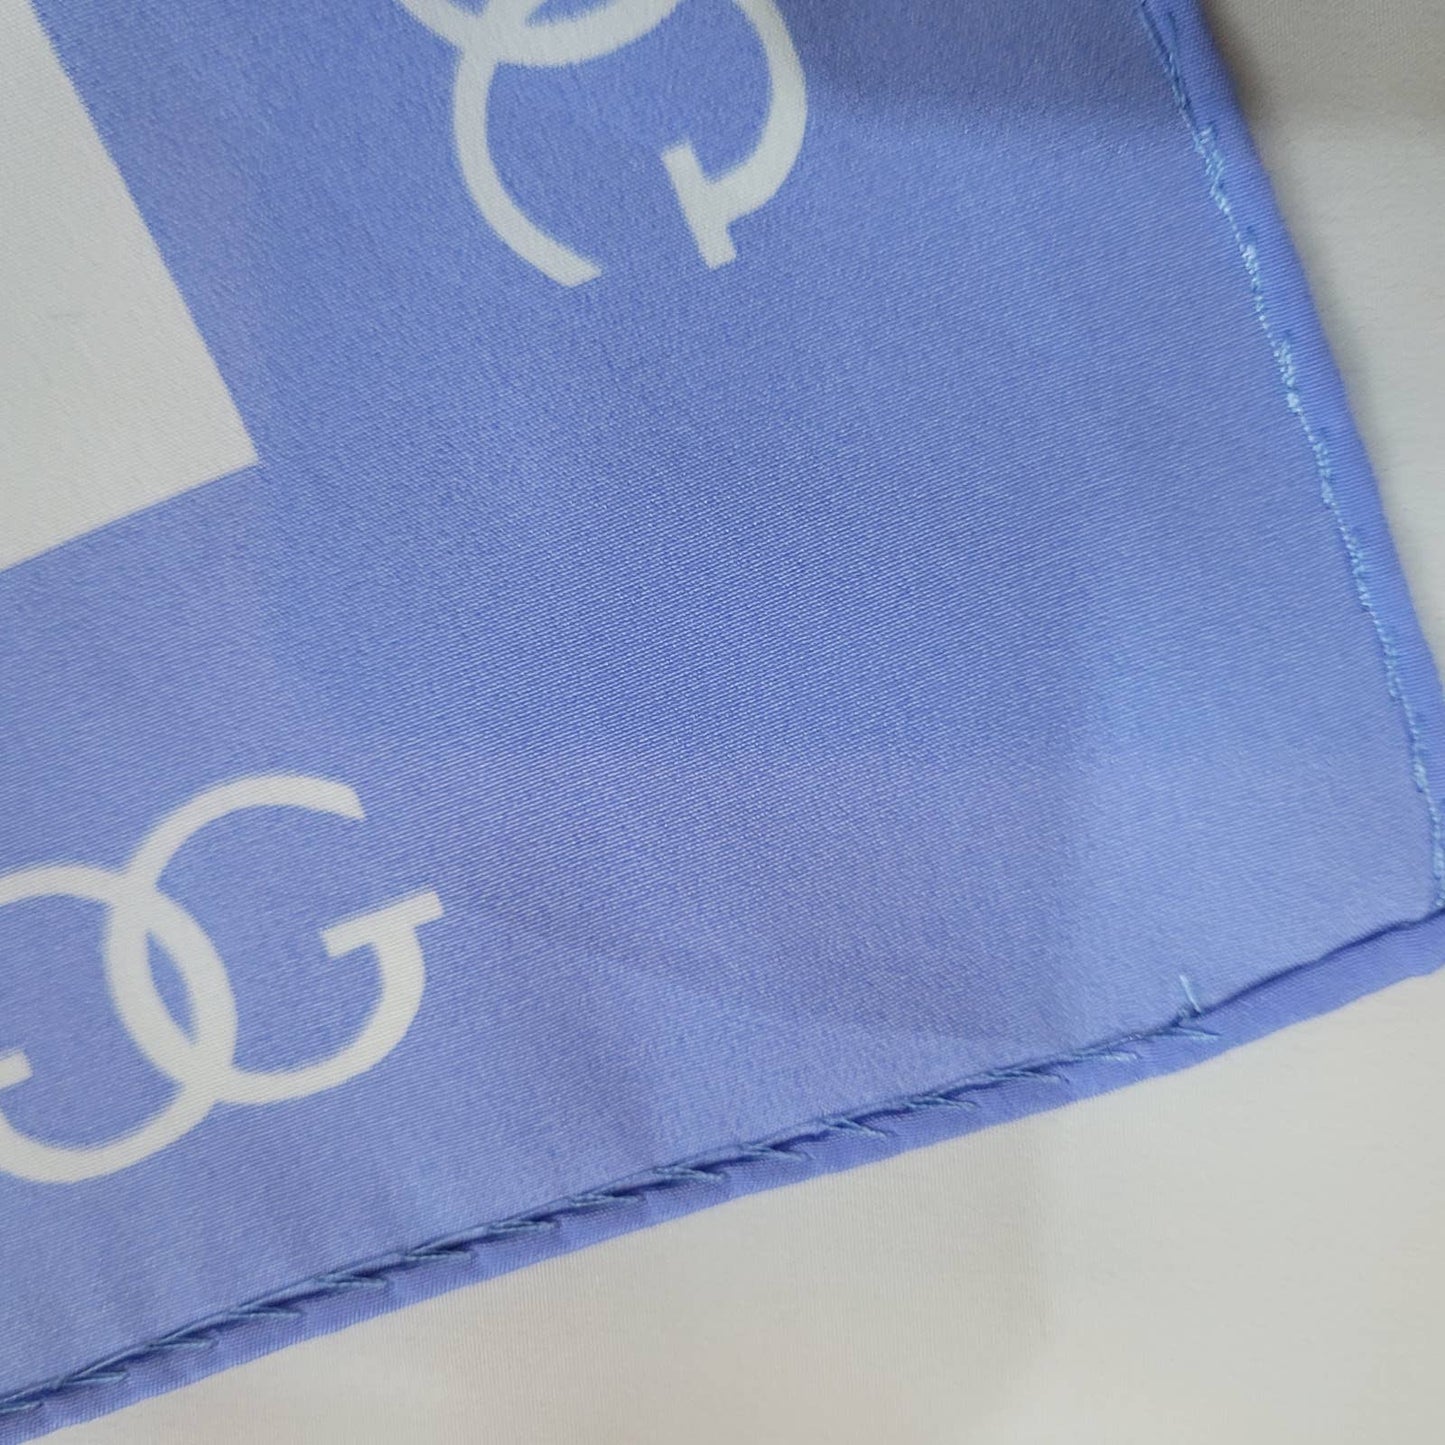 Periwinkle Blue Square Scarf with Monogrammed GMarkita's ClosetUnbranded